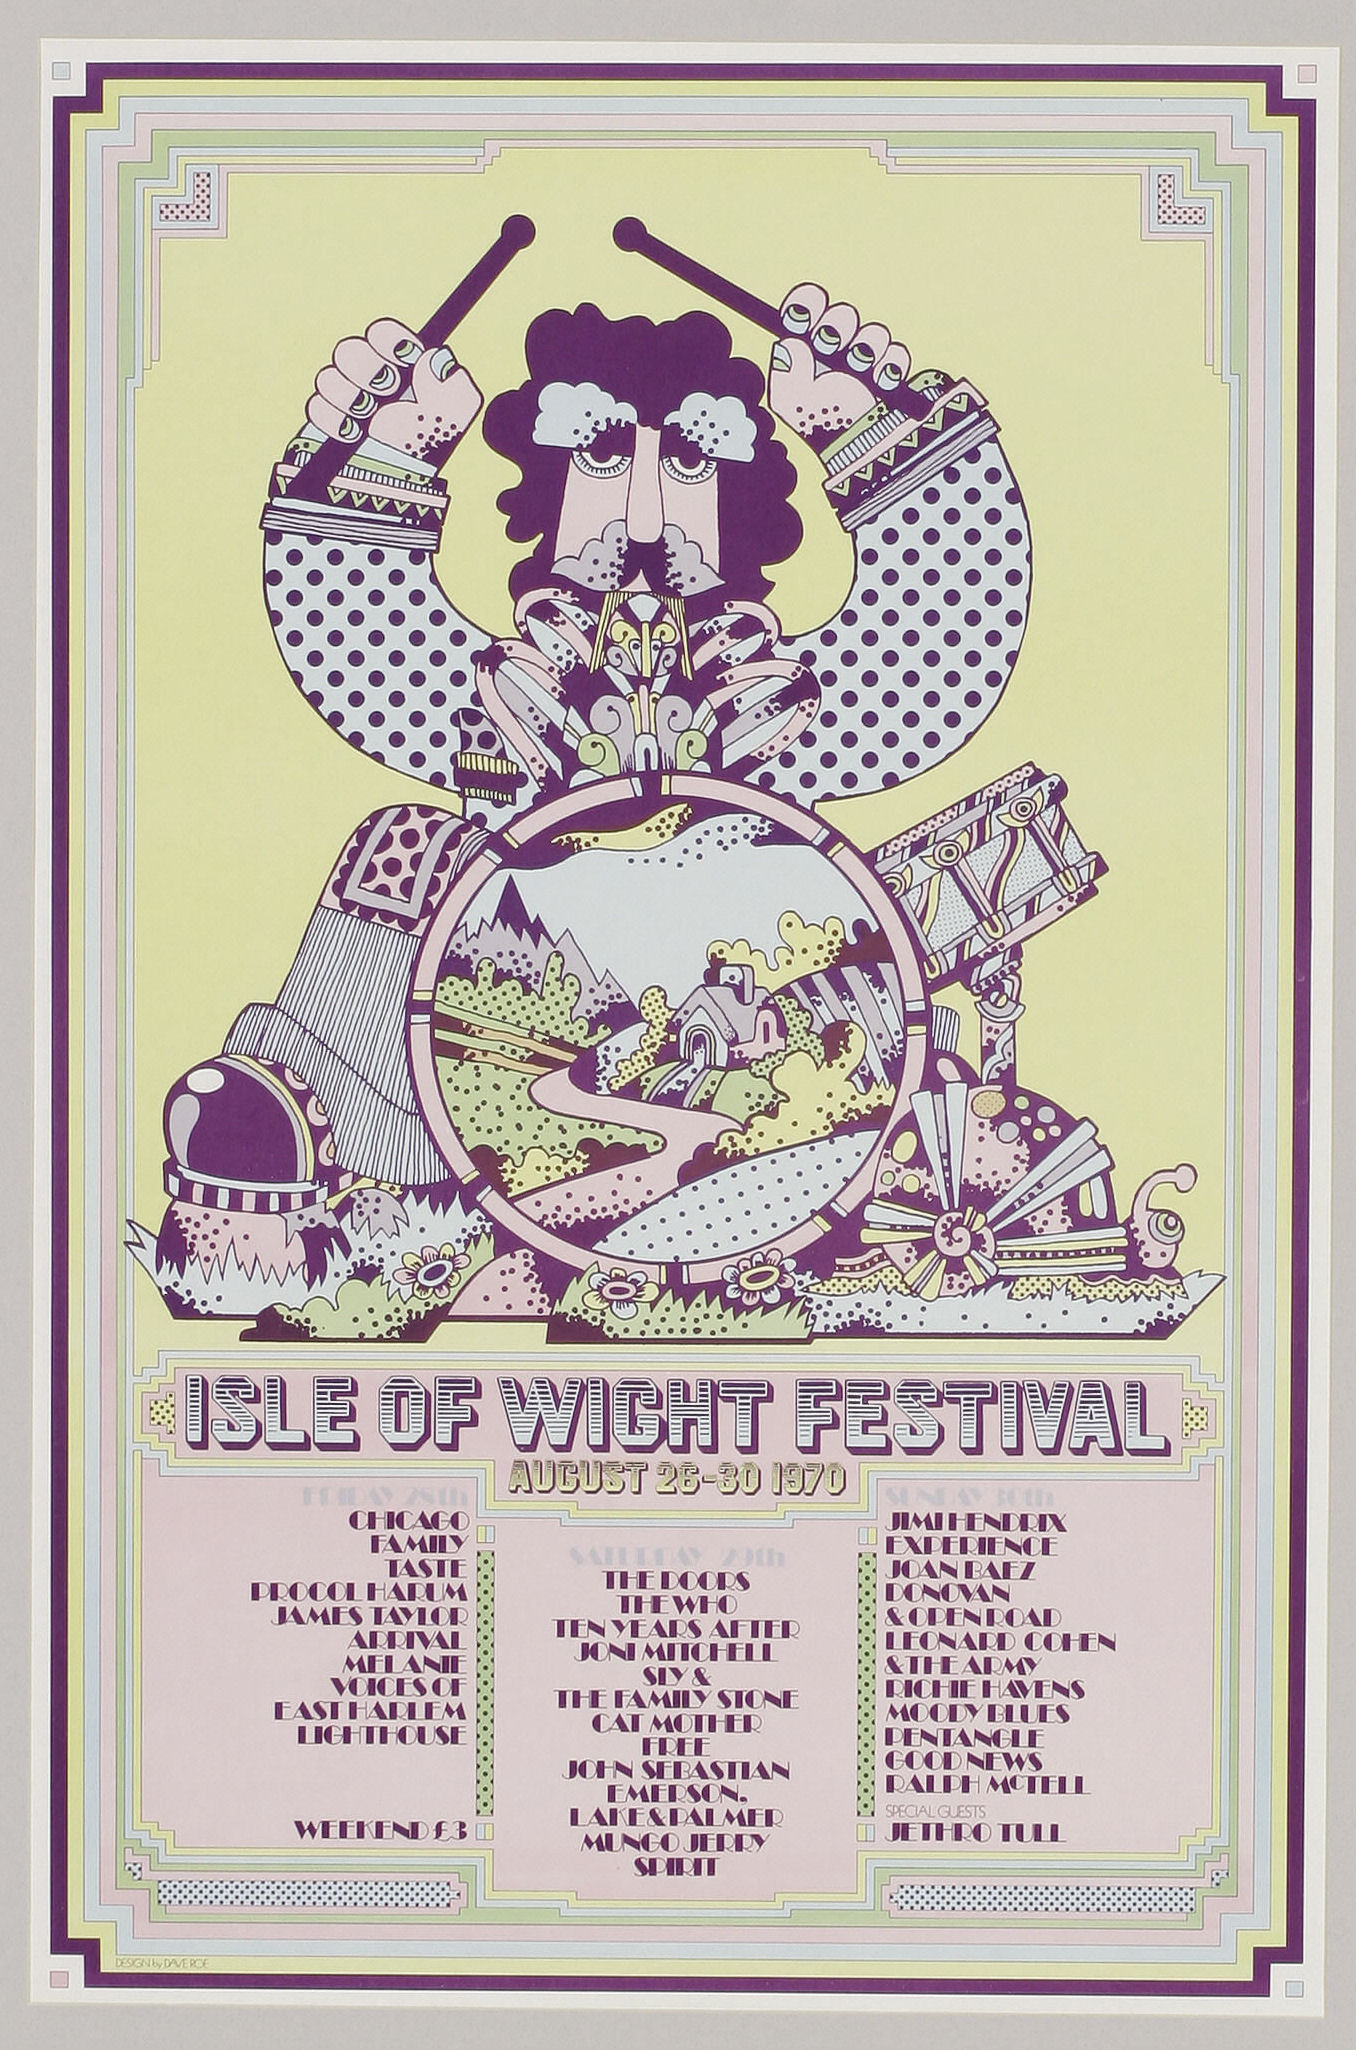 Original 20"x30" Color Poster for the Festival designed by Dave Roe.